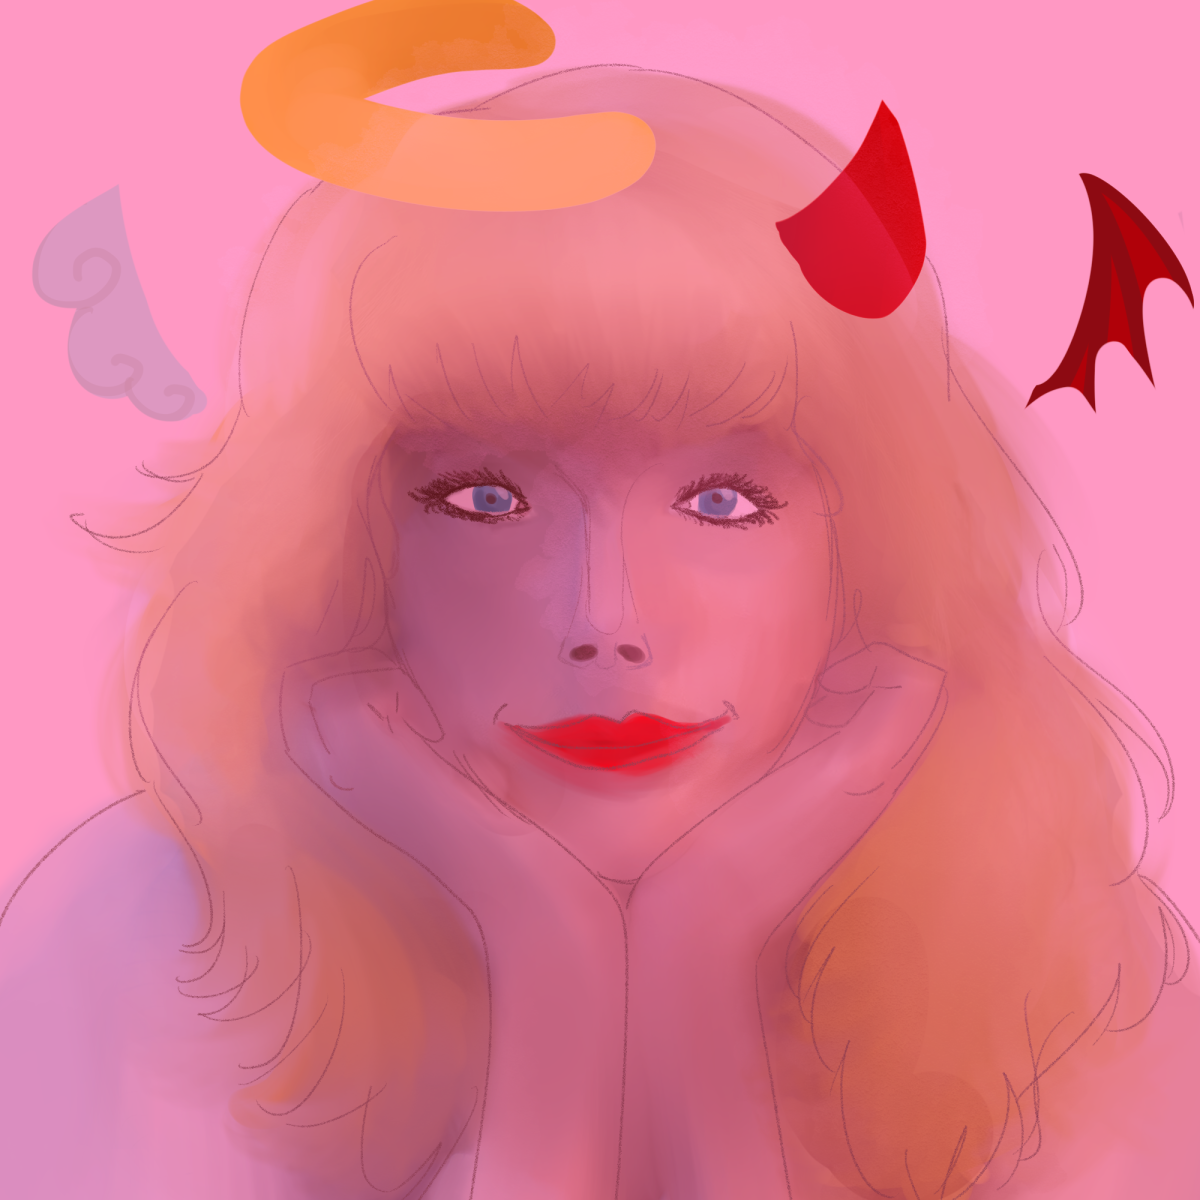 Taylor swift if she was heavenly color edition